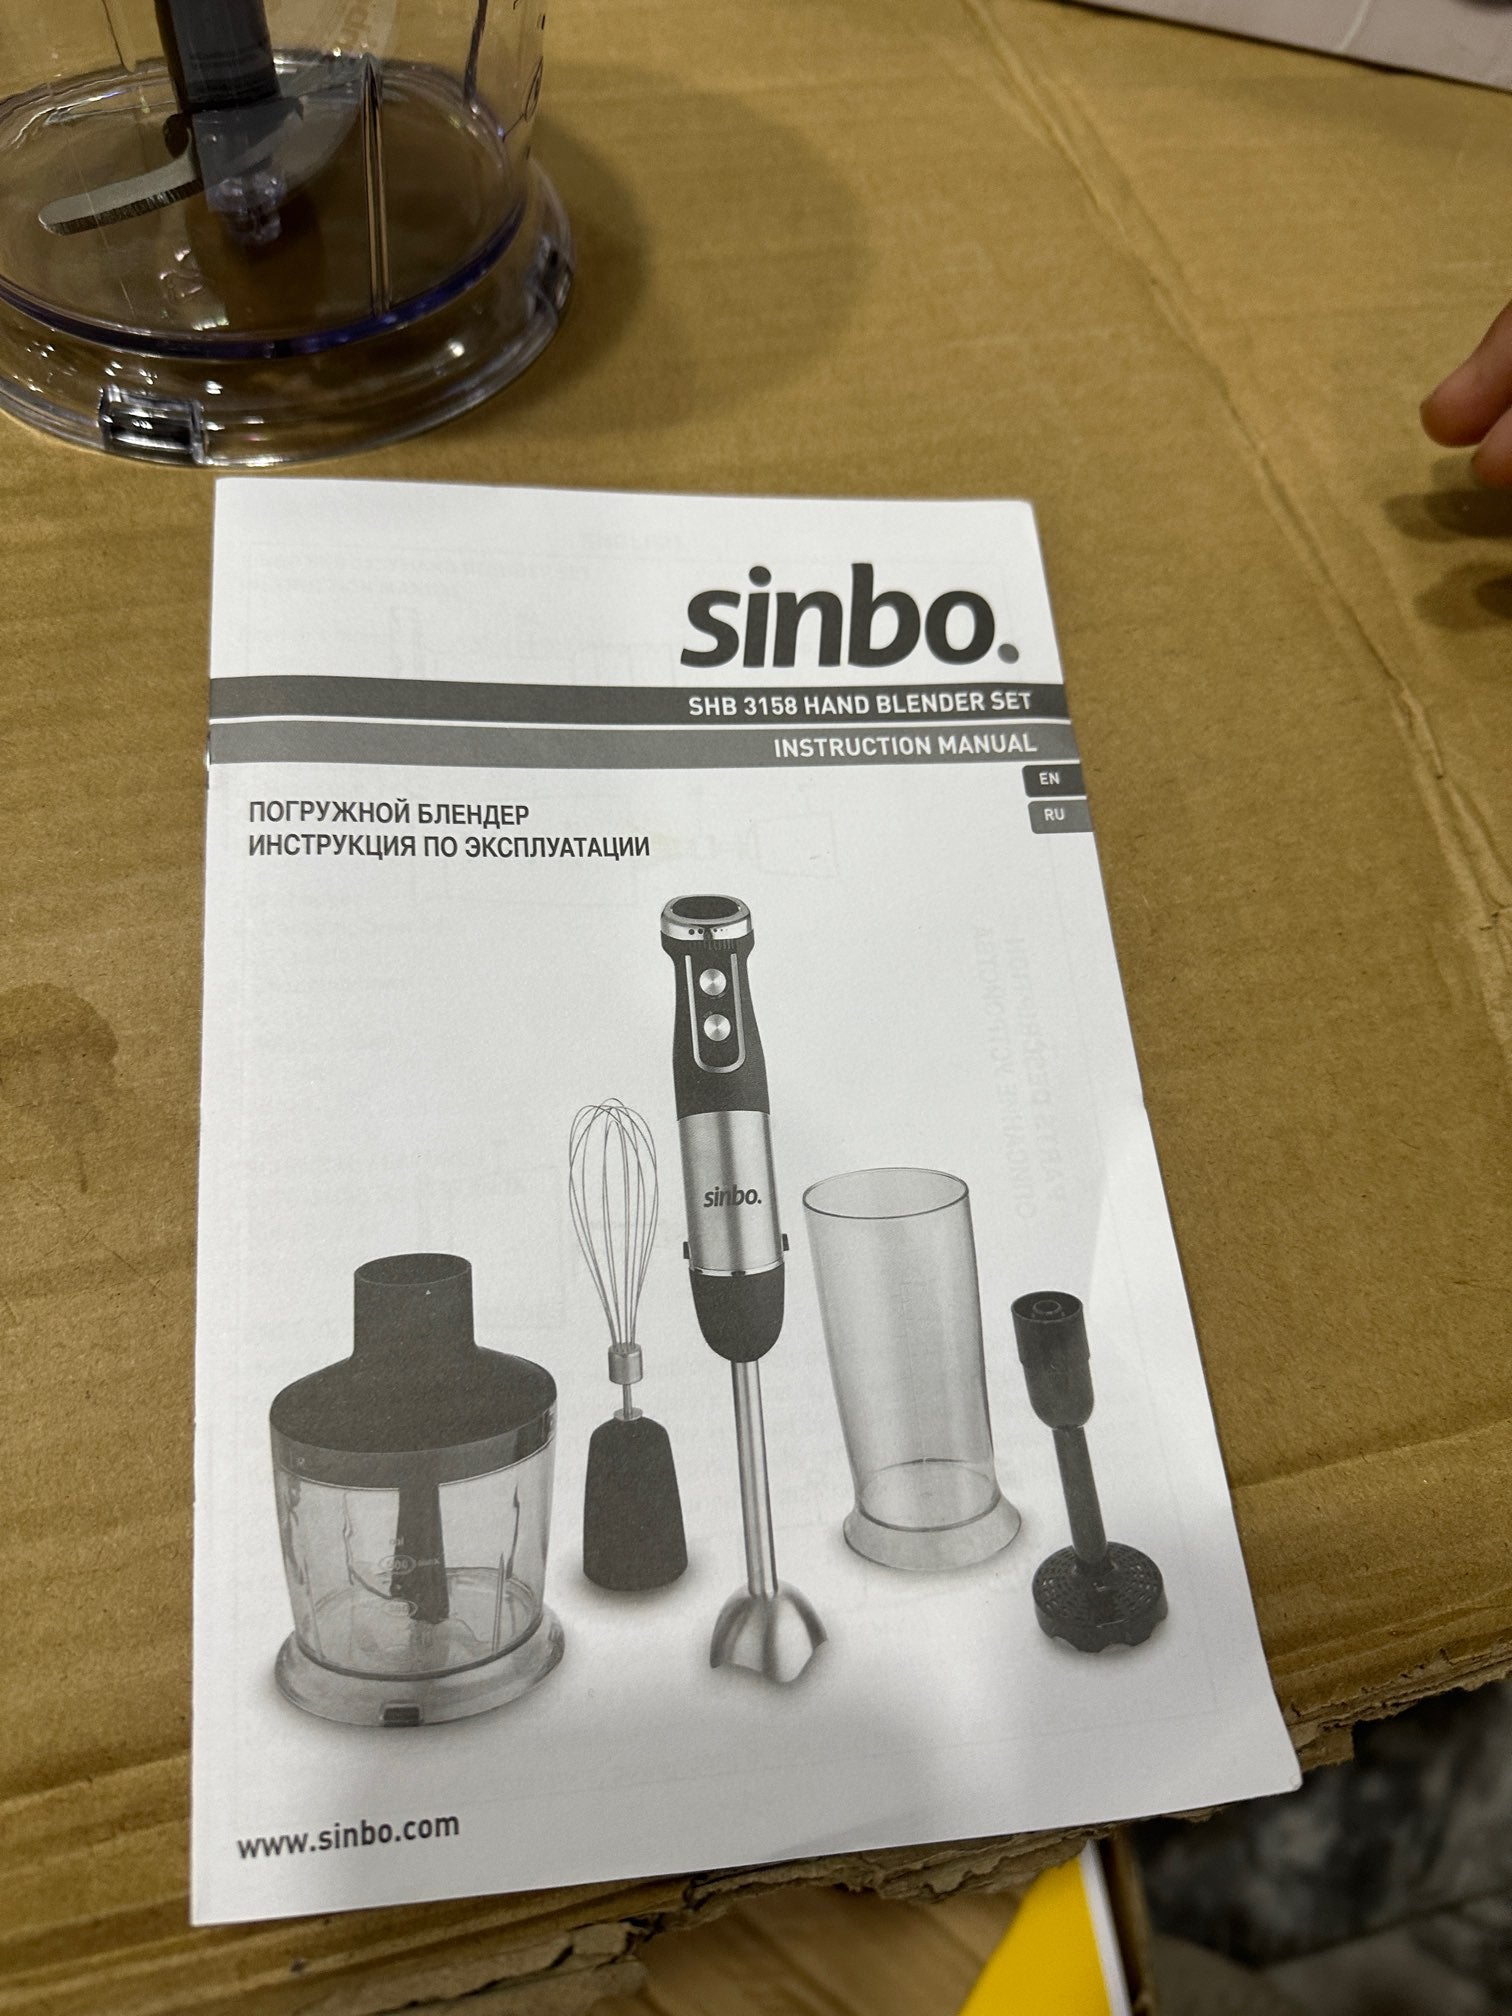 Russia Lot 5 in one hand blender set